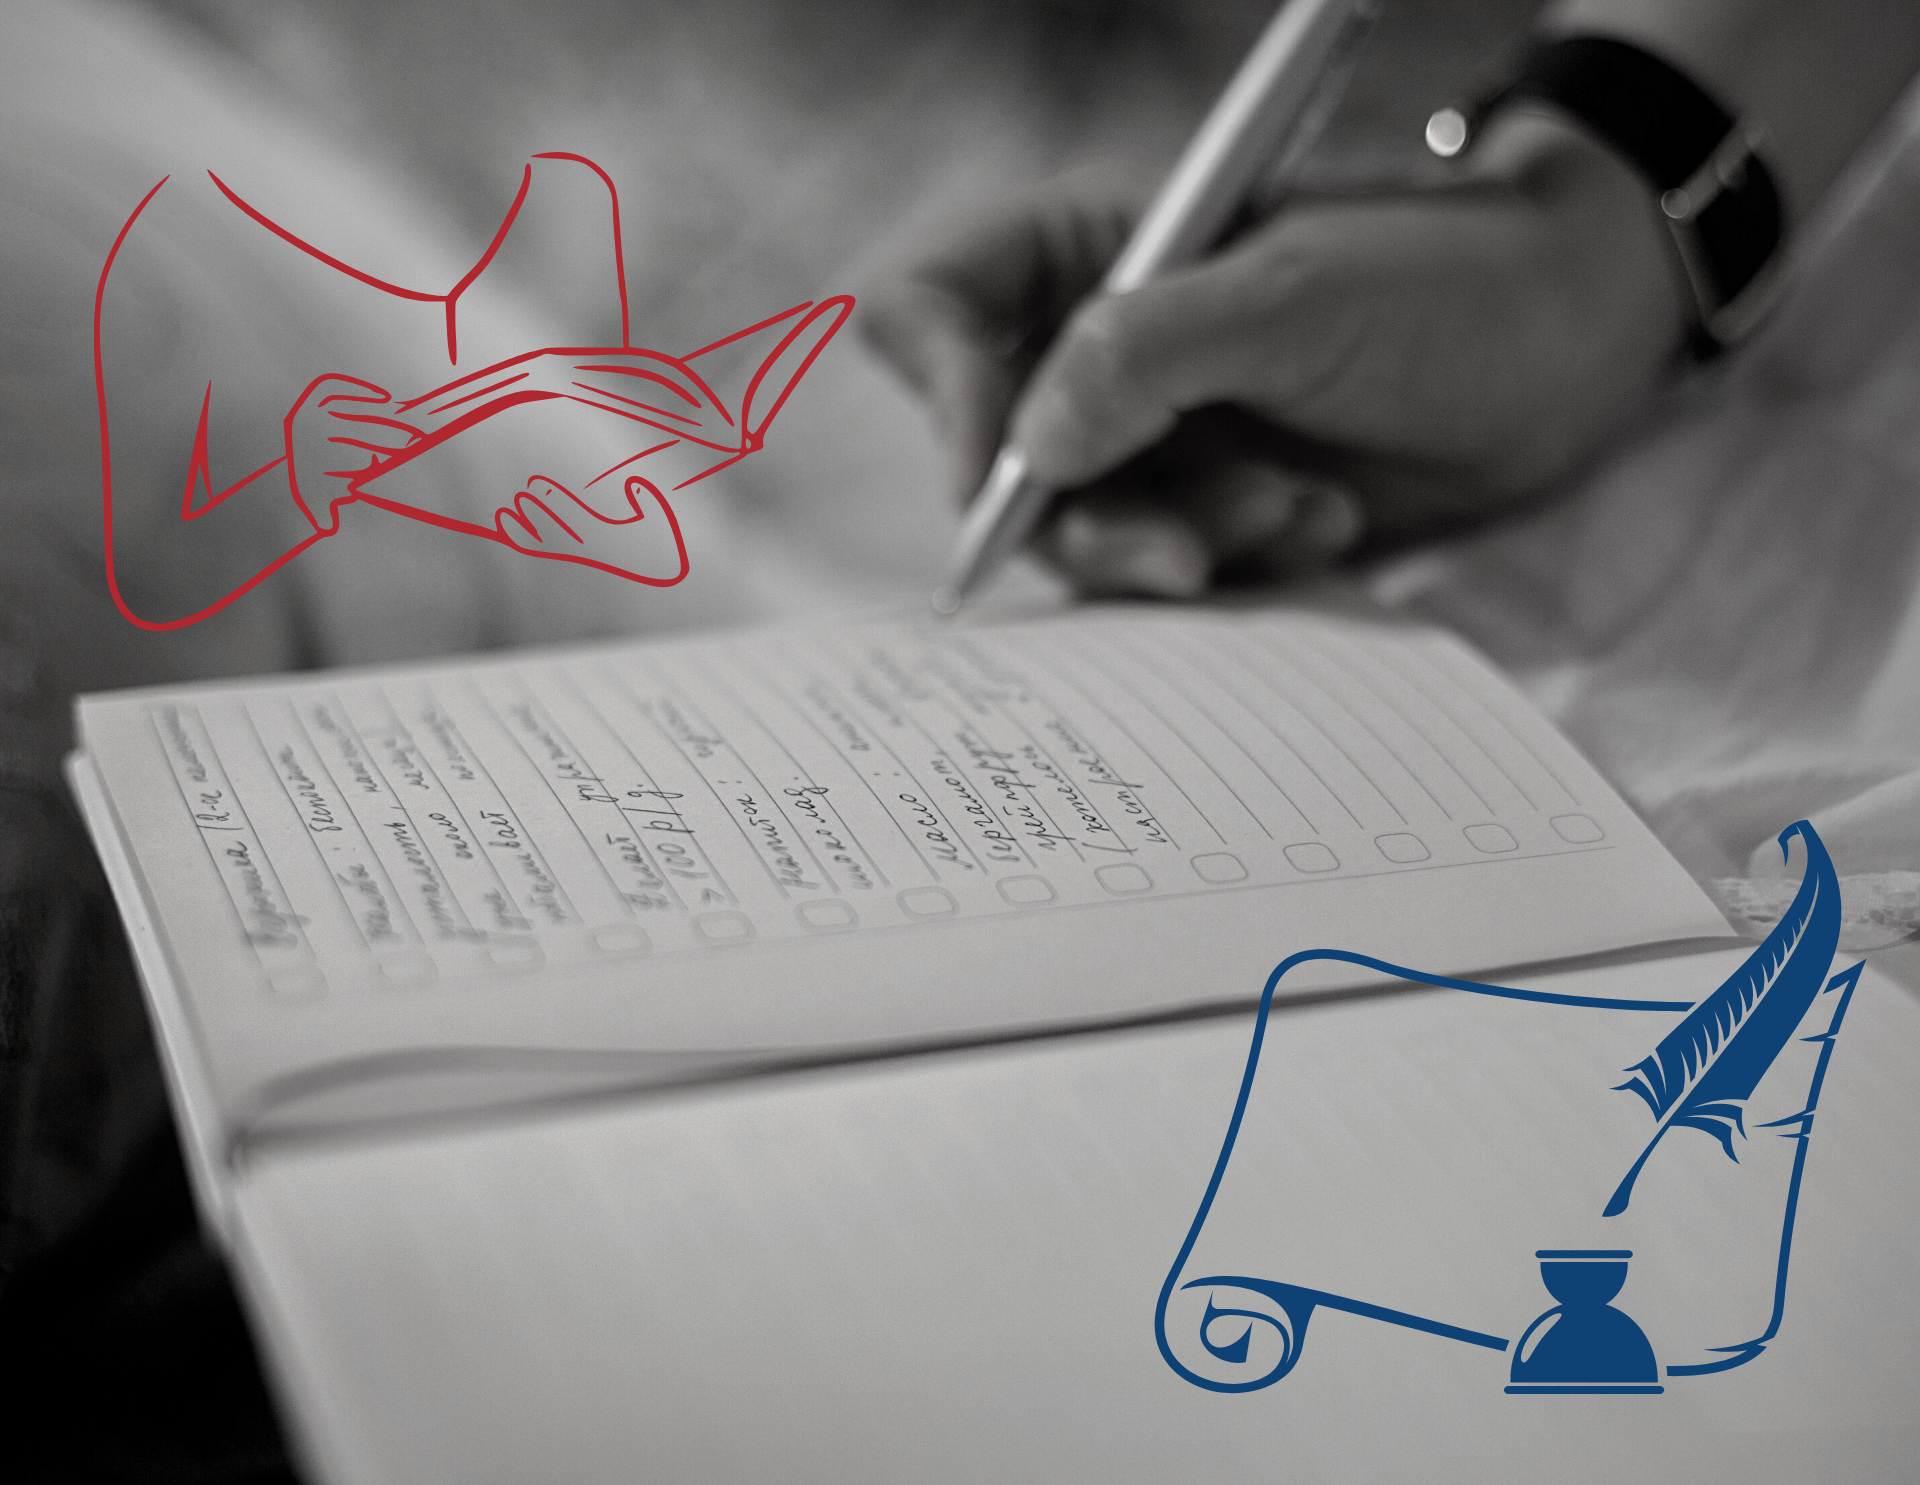 Black and white image of a notebook. A hand is pictured, using a pen to write in the notebook. Overlaid on the image are smaller line drawings in red and blue of a quill and ink, and a person holding a book.